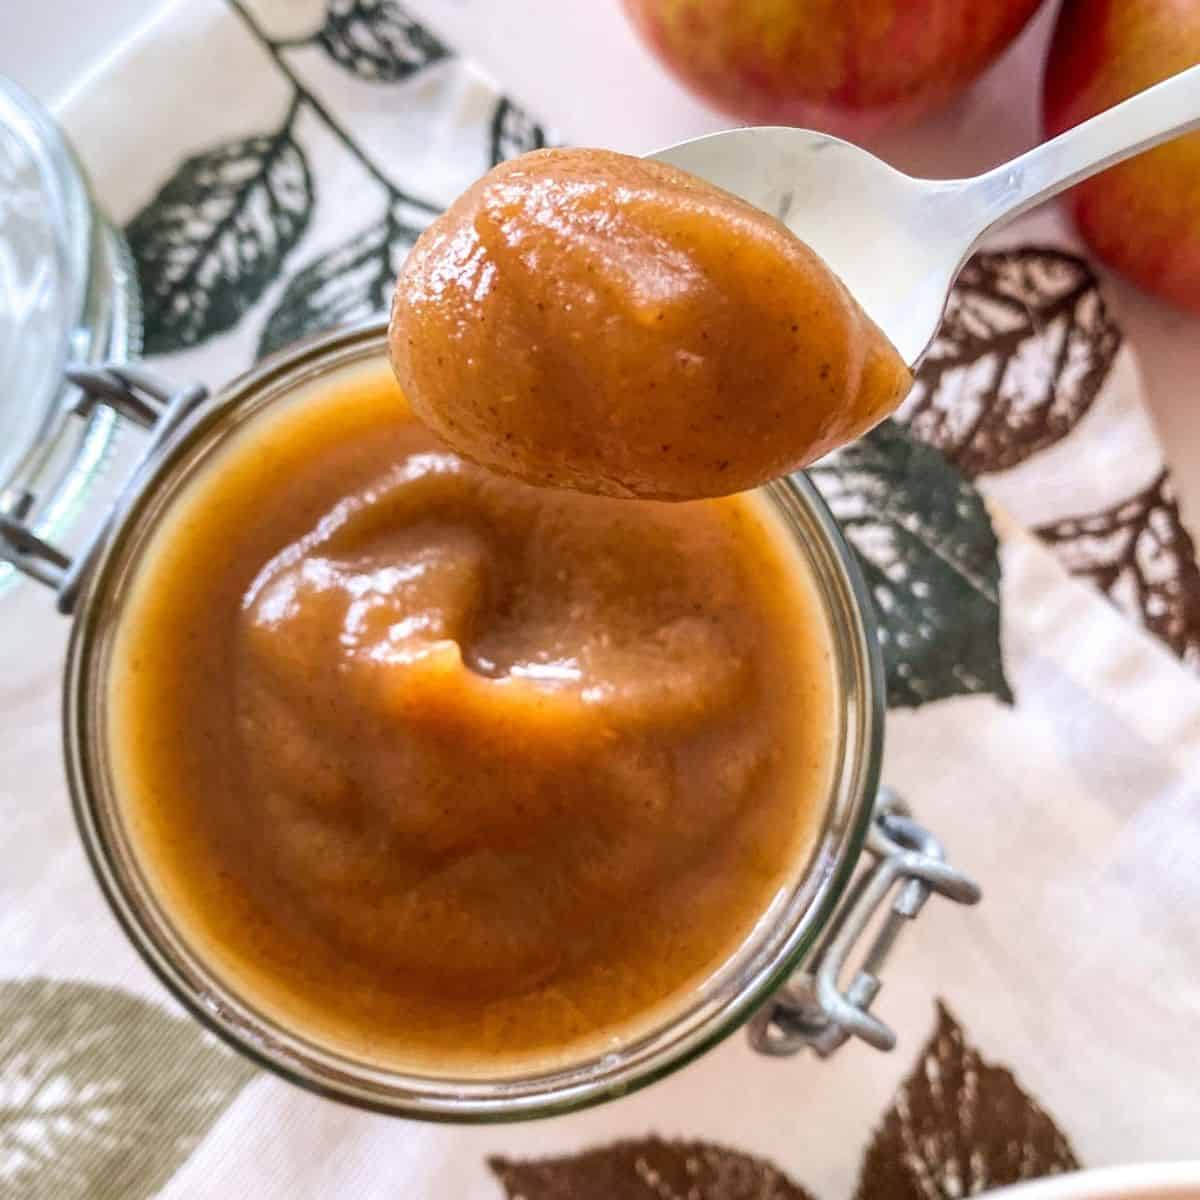 Jar of apple butter with spoonful held up above it and apples in the background.